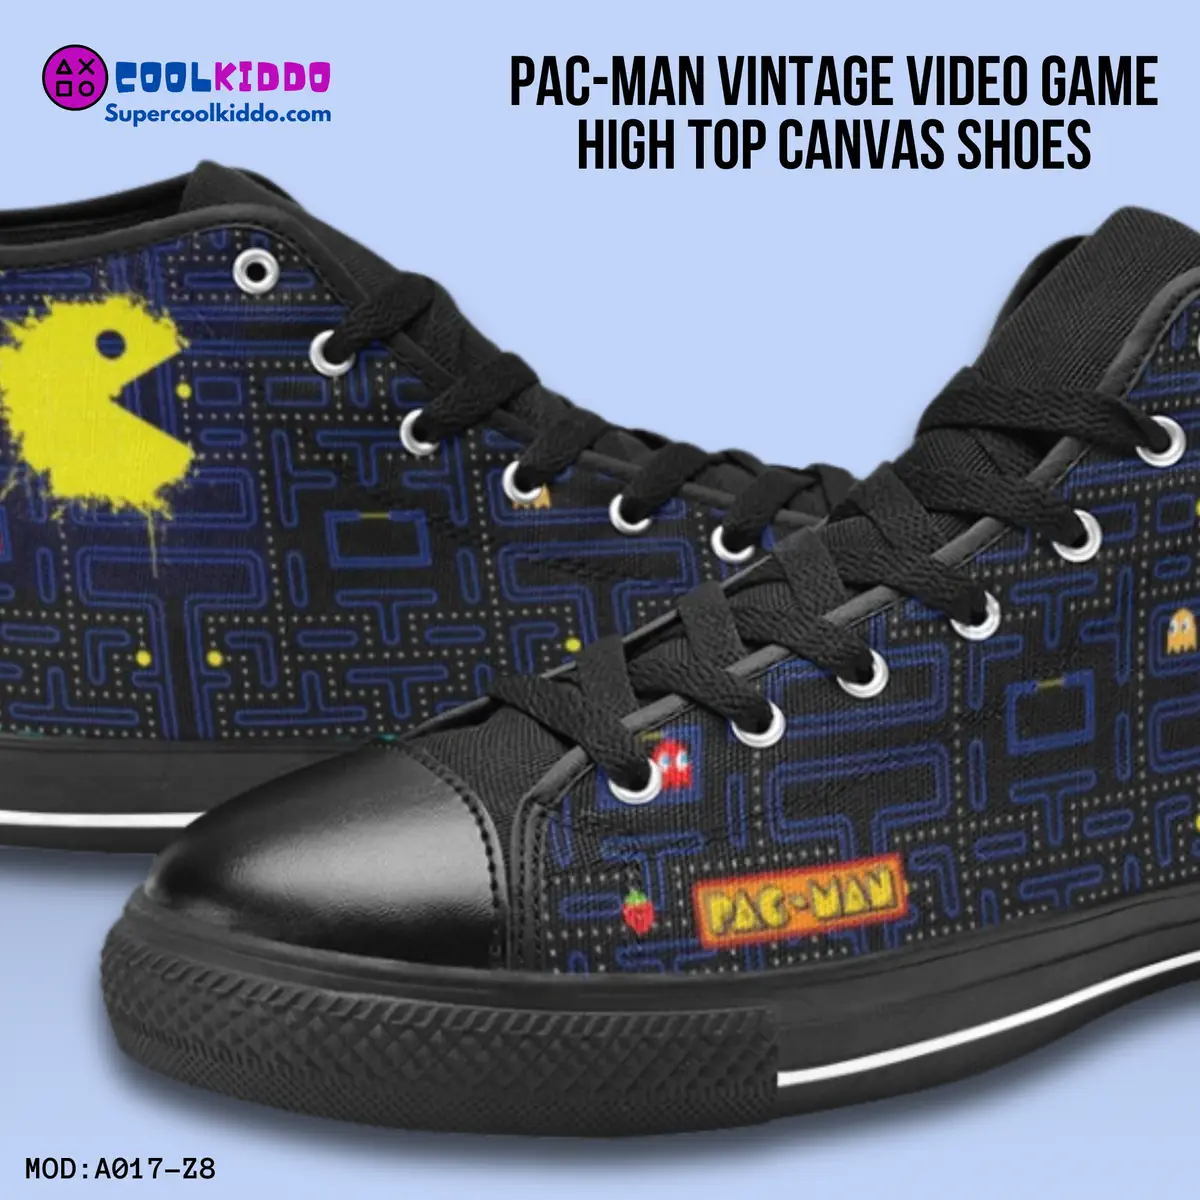 Pac Man Vintage Video Game High Top Sneakers – Custom Canvas Shoes for Kids/Youth Cool Kiddo 22